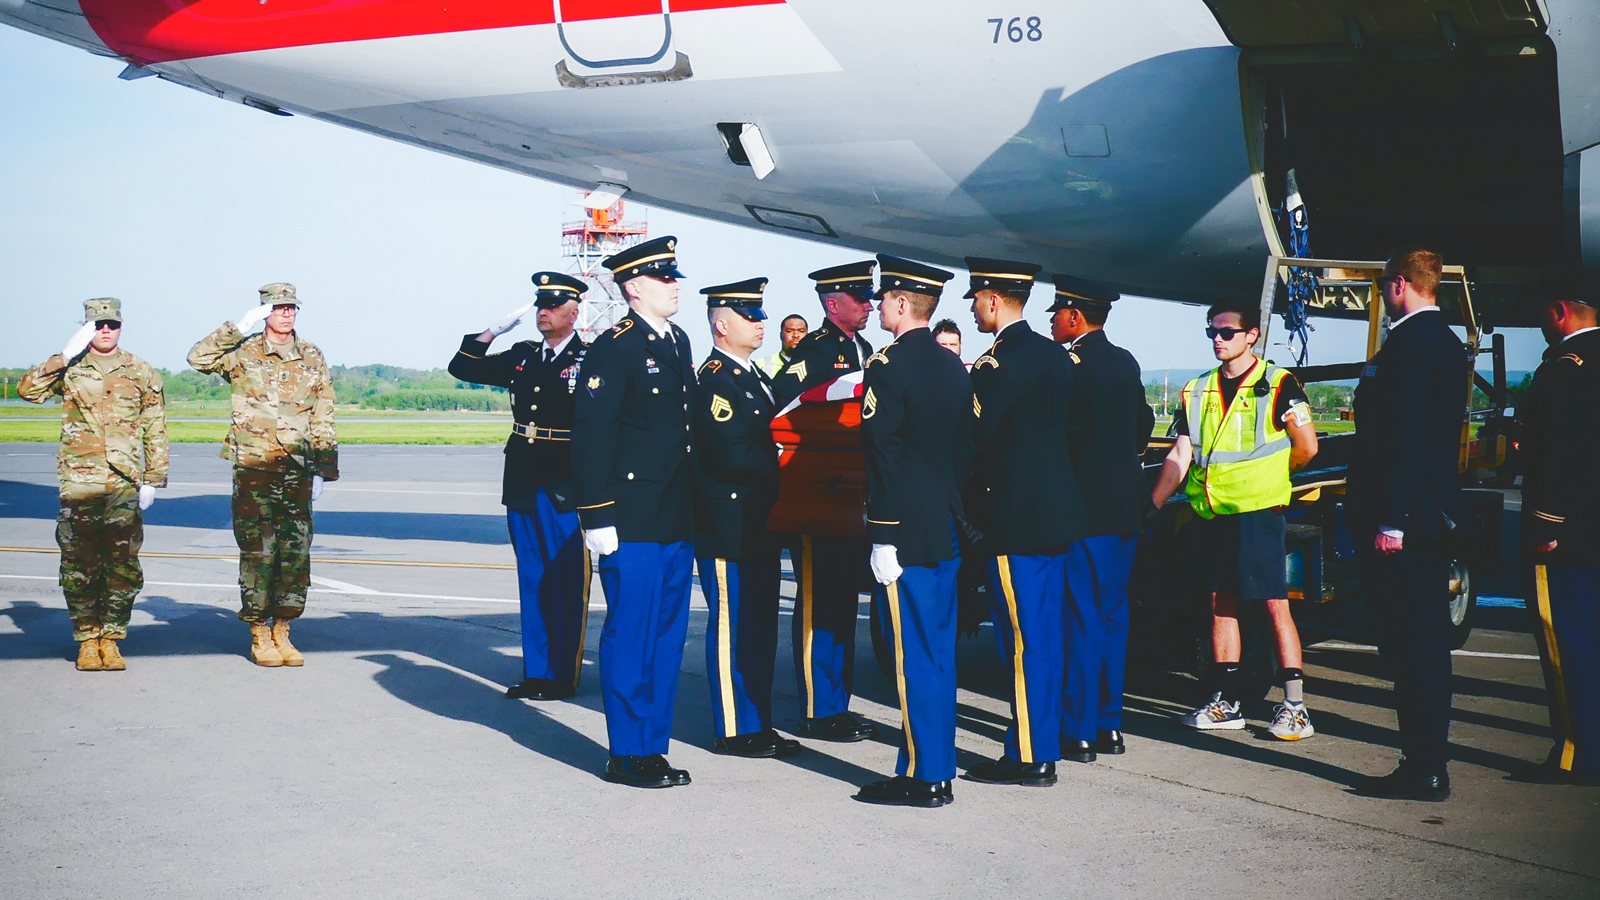 A military honor guard salutes the remains of a fallen service member on the runway of an airport next to an airplane.